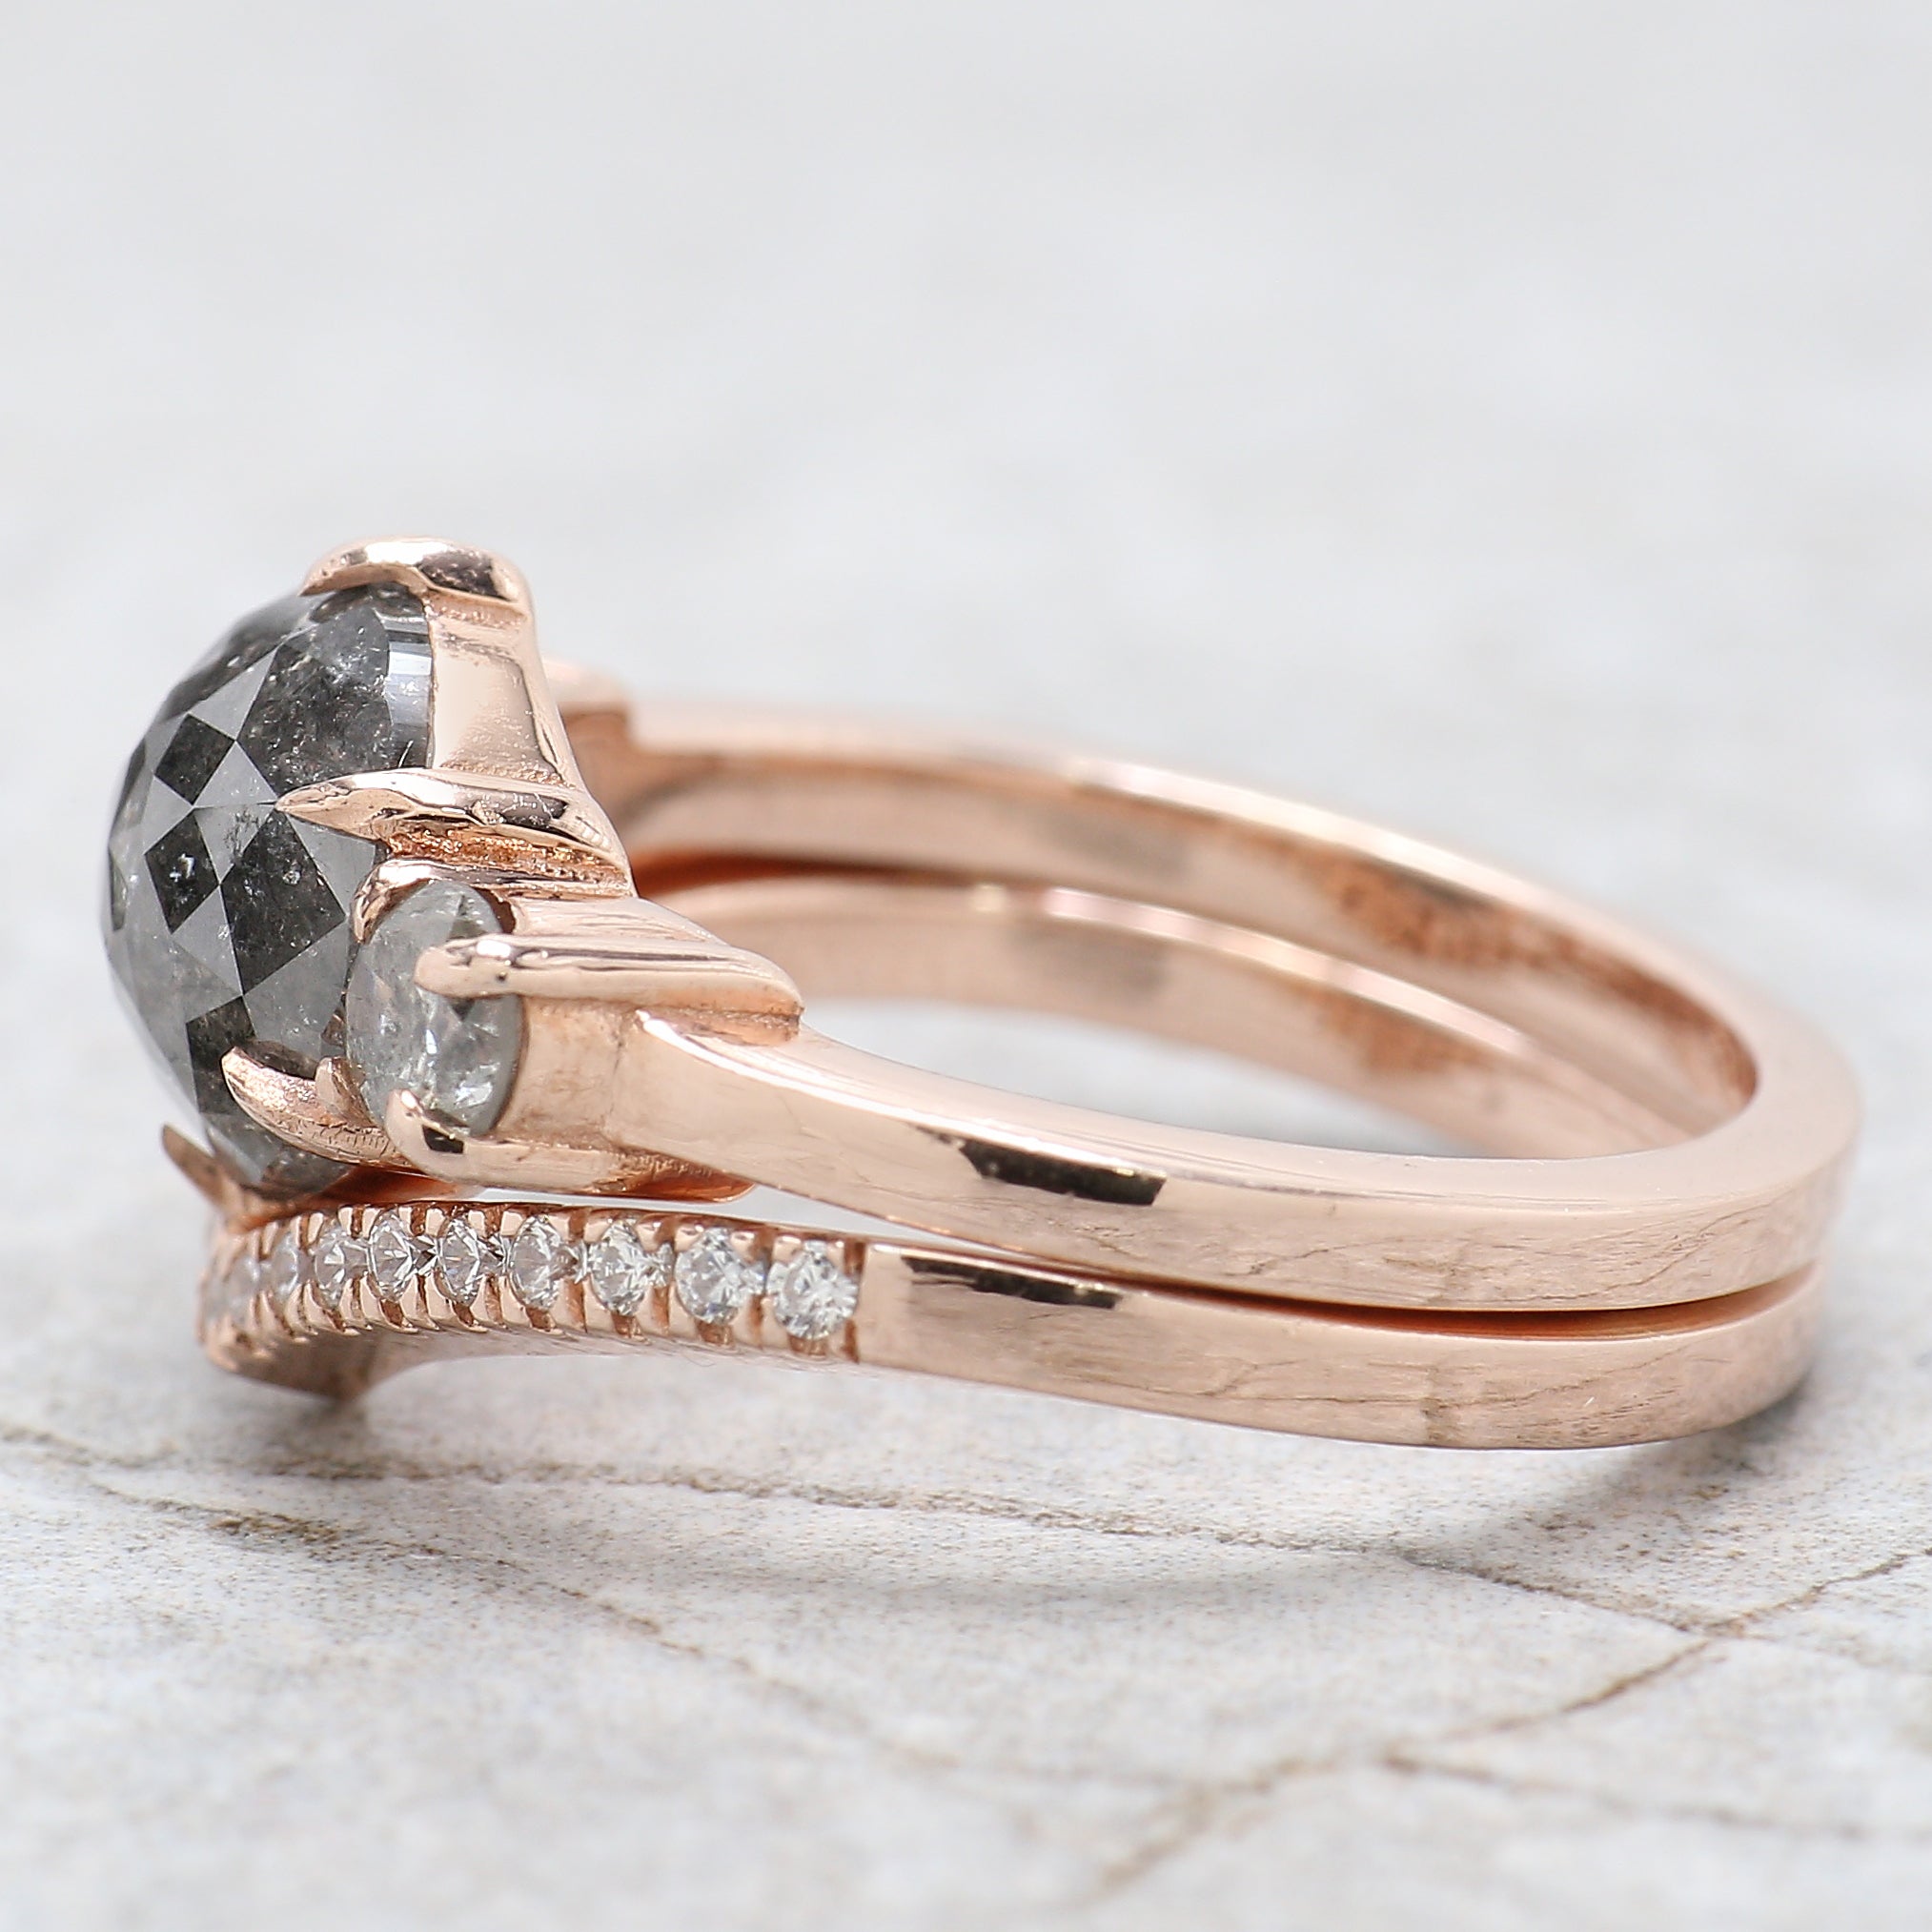 Round Rose Cut Salt And Pepper Diamond Ring 2.08 Ct 7.95 MM Round Rose Diamond Ring 14K Rose Gold Silver Engagement Ring Gift For Her QL455